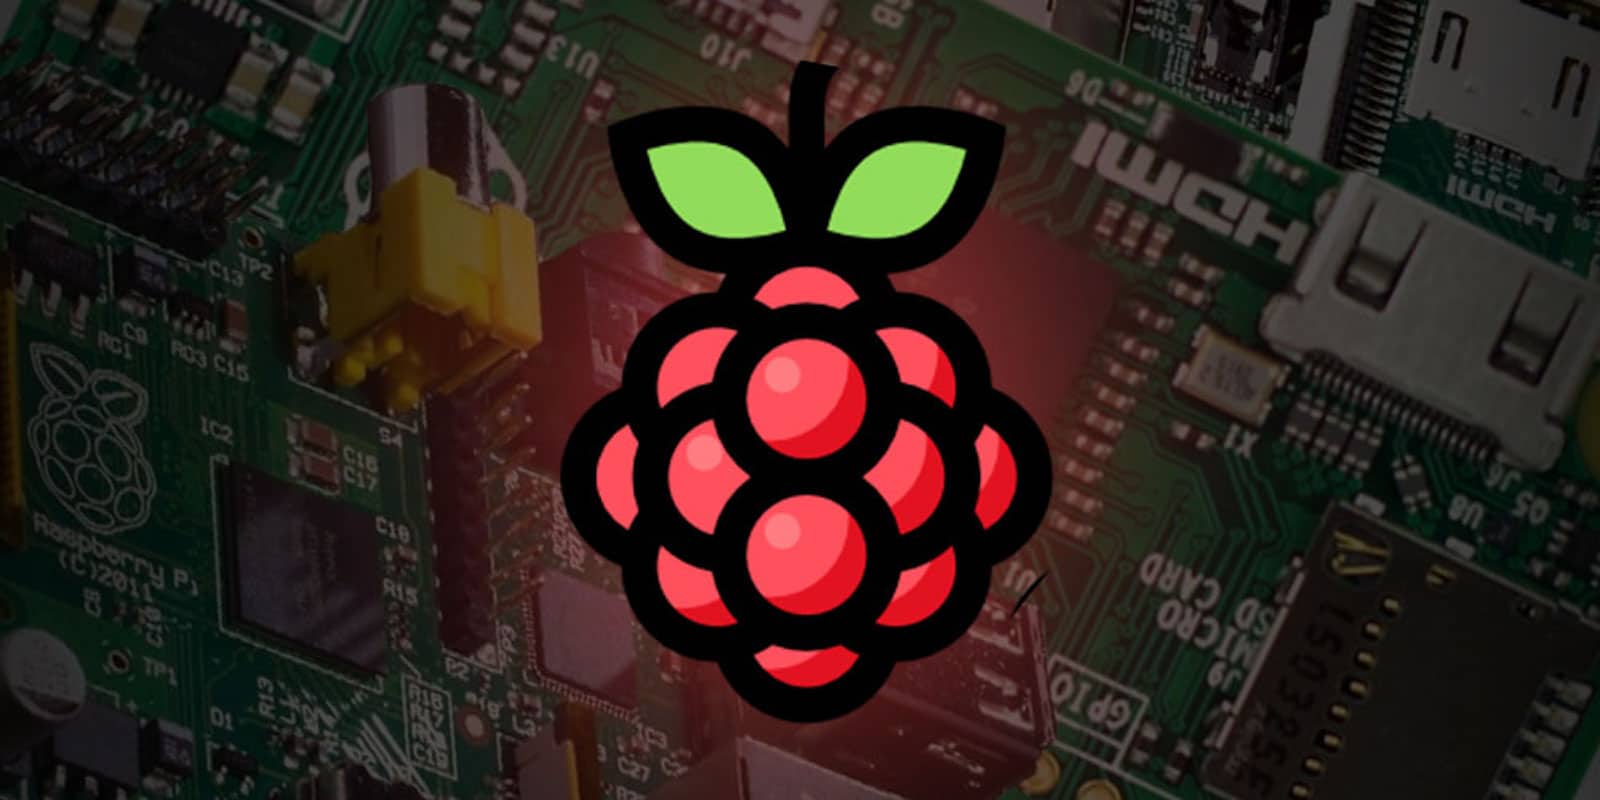 Learn the many uses of Raspberry Pi with this absolutely loaded lesson bundle.